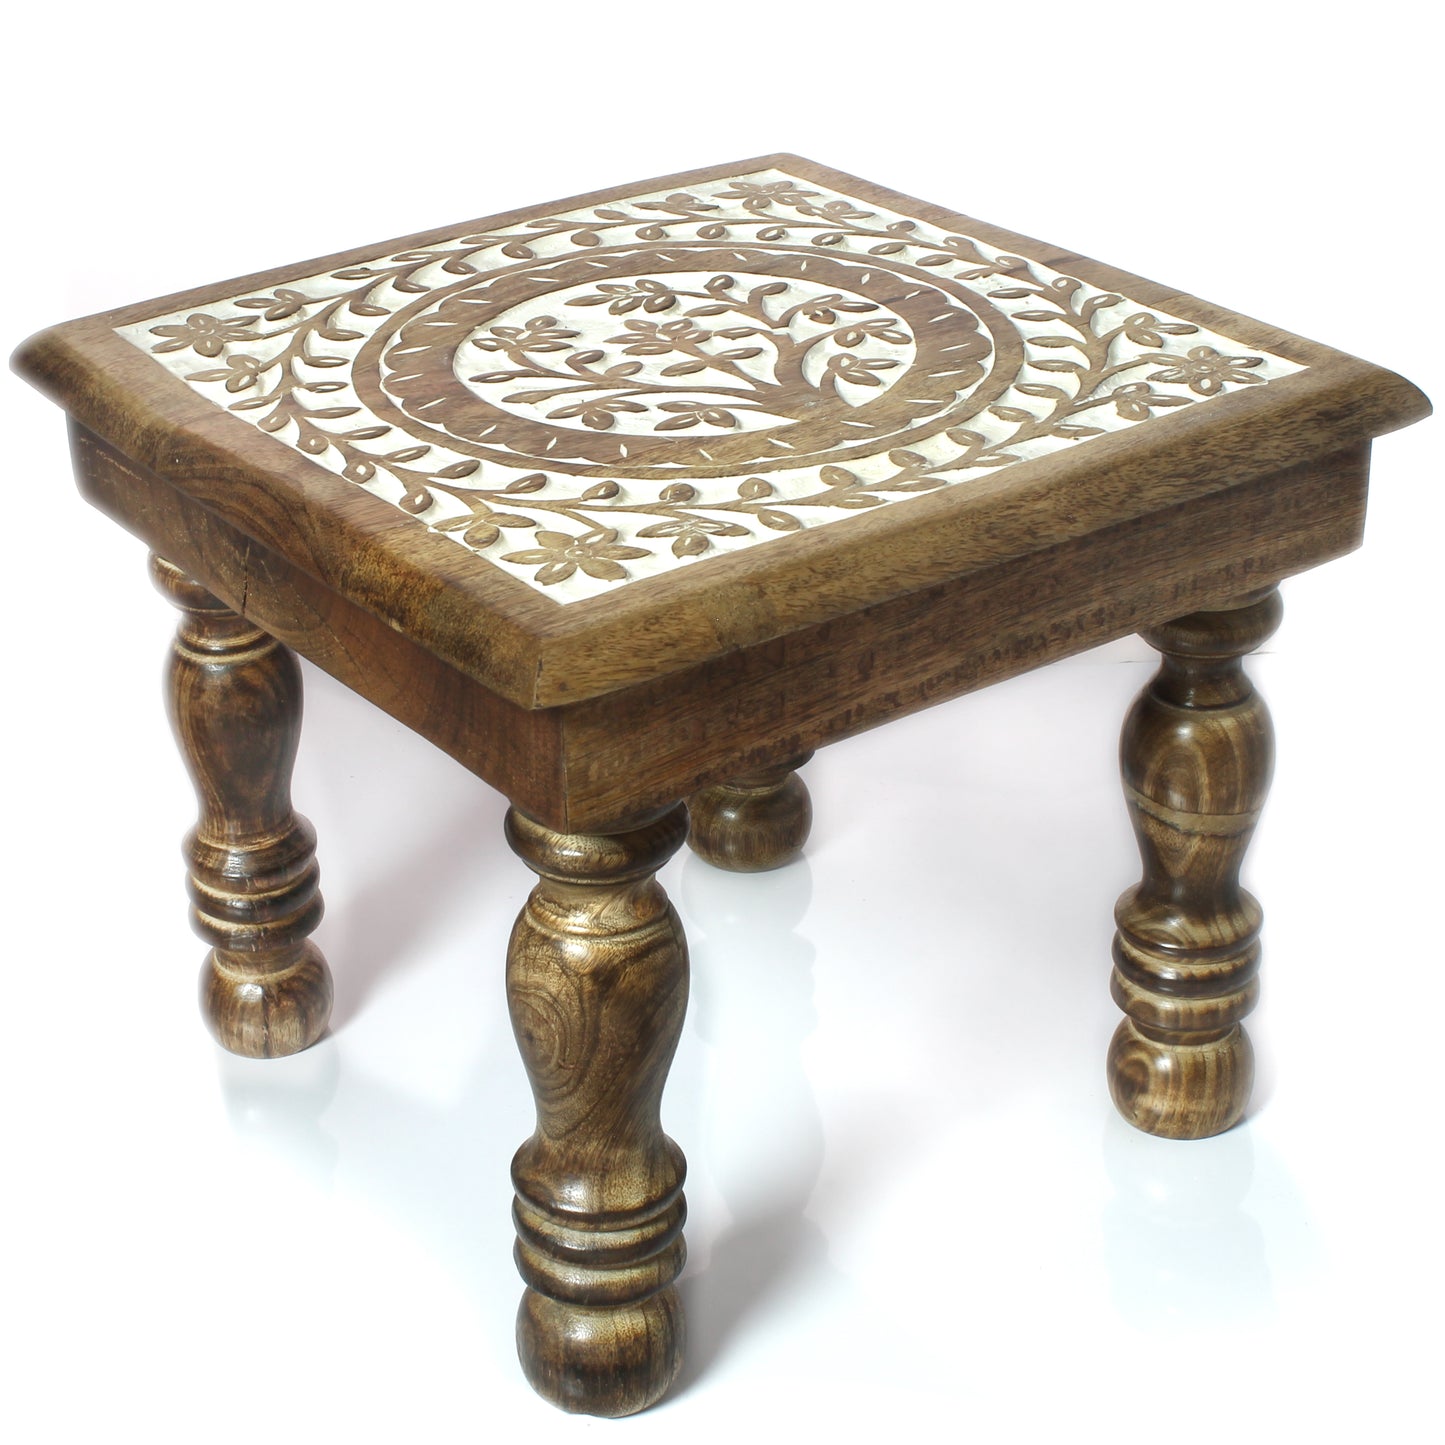 SAVON Wooden Step Stool Small Footstool footrest Table